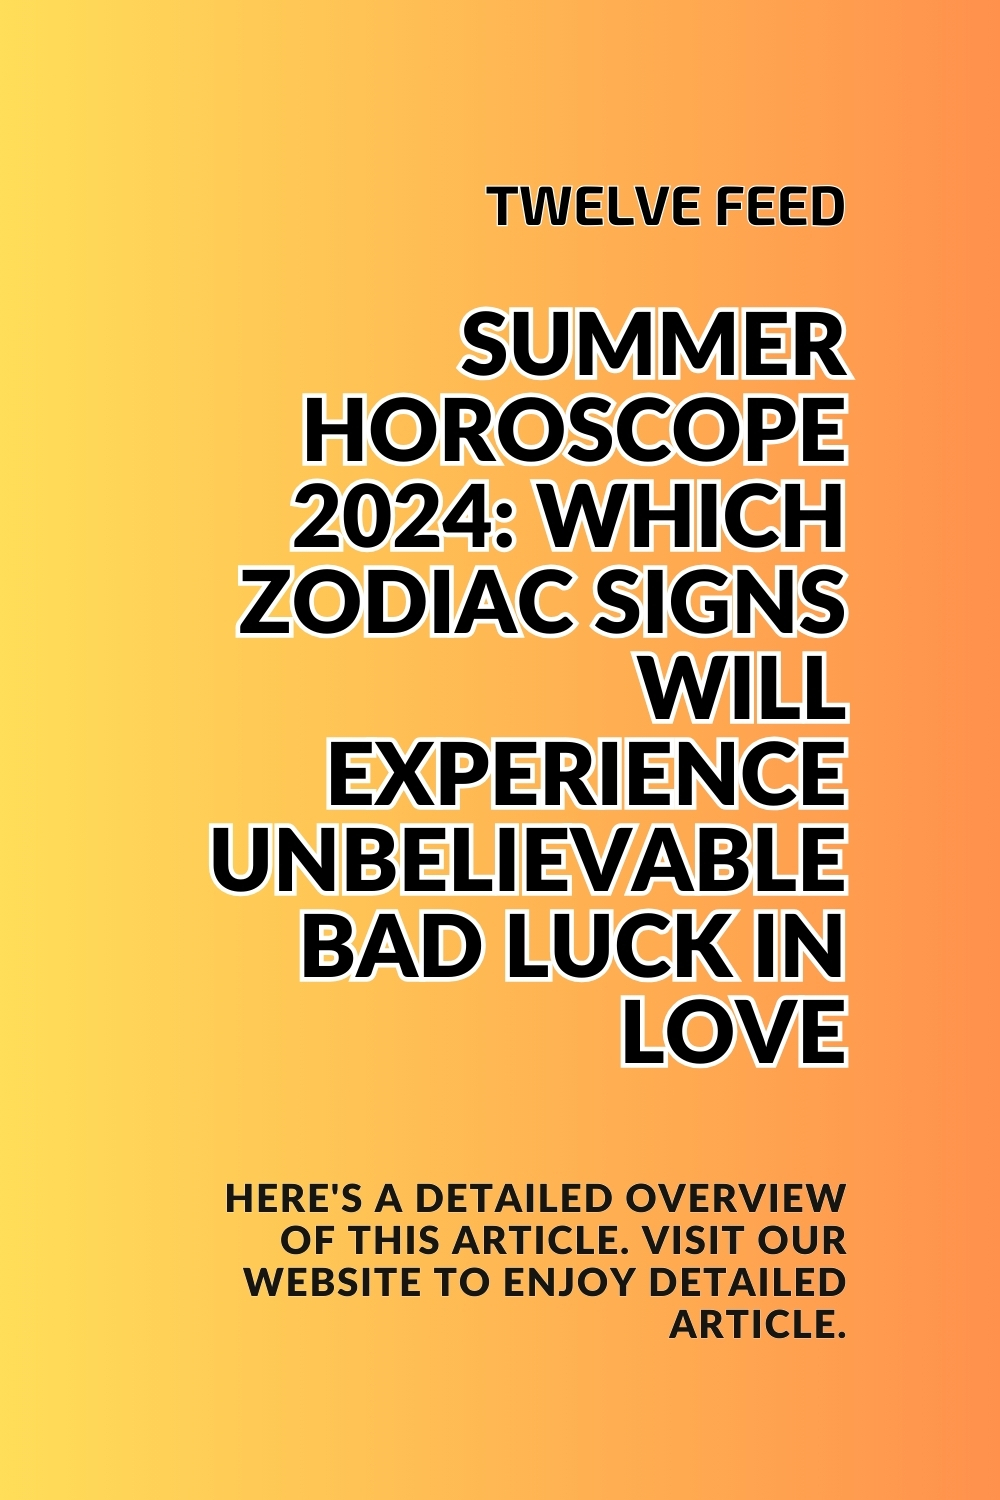 Summer Horoscope 2024: Which Zodiac Signs Will Experience Unbelievable Bad Luck In Love